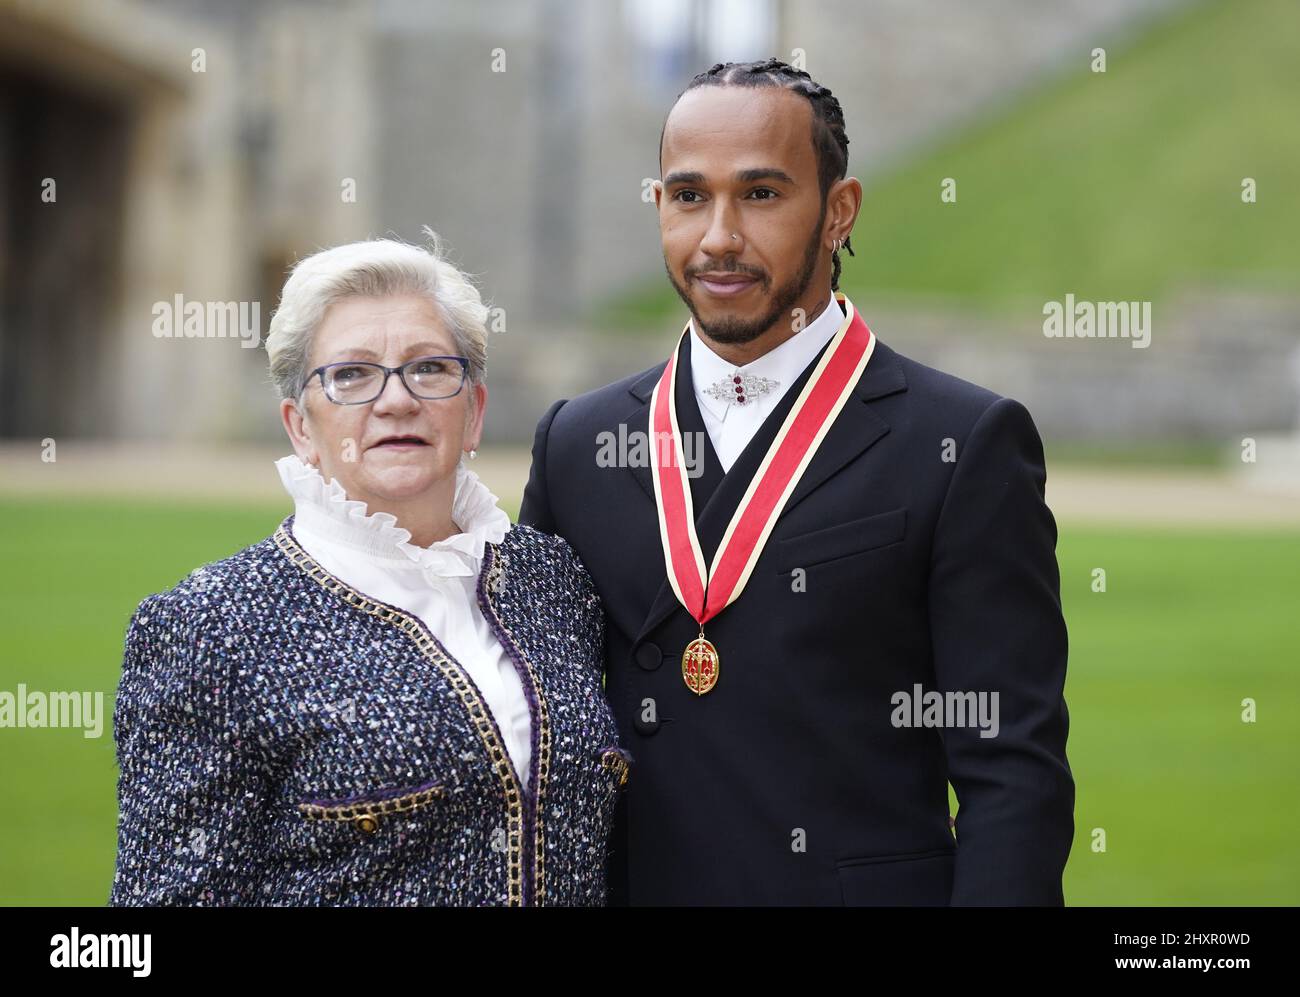 File photo dated 15-12-2021 of Sir Lewis Hamilton with his mother Carmen Lockhart after he was made a Knight Bachelor by the Prince of Wales during a investiture ceremony at Windsor Castle. Hamilton has revealed he is in the process of changing his name. The seven-time world champion says he intends to incorporate his mother's maiden name, Larbalestier, alongside Hamilton. Issue date: Monday March 14, 2022. Stock Photo